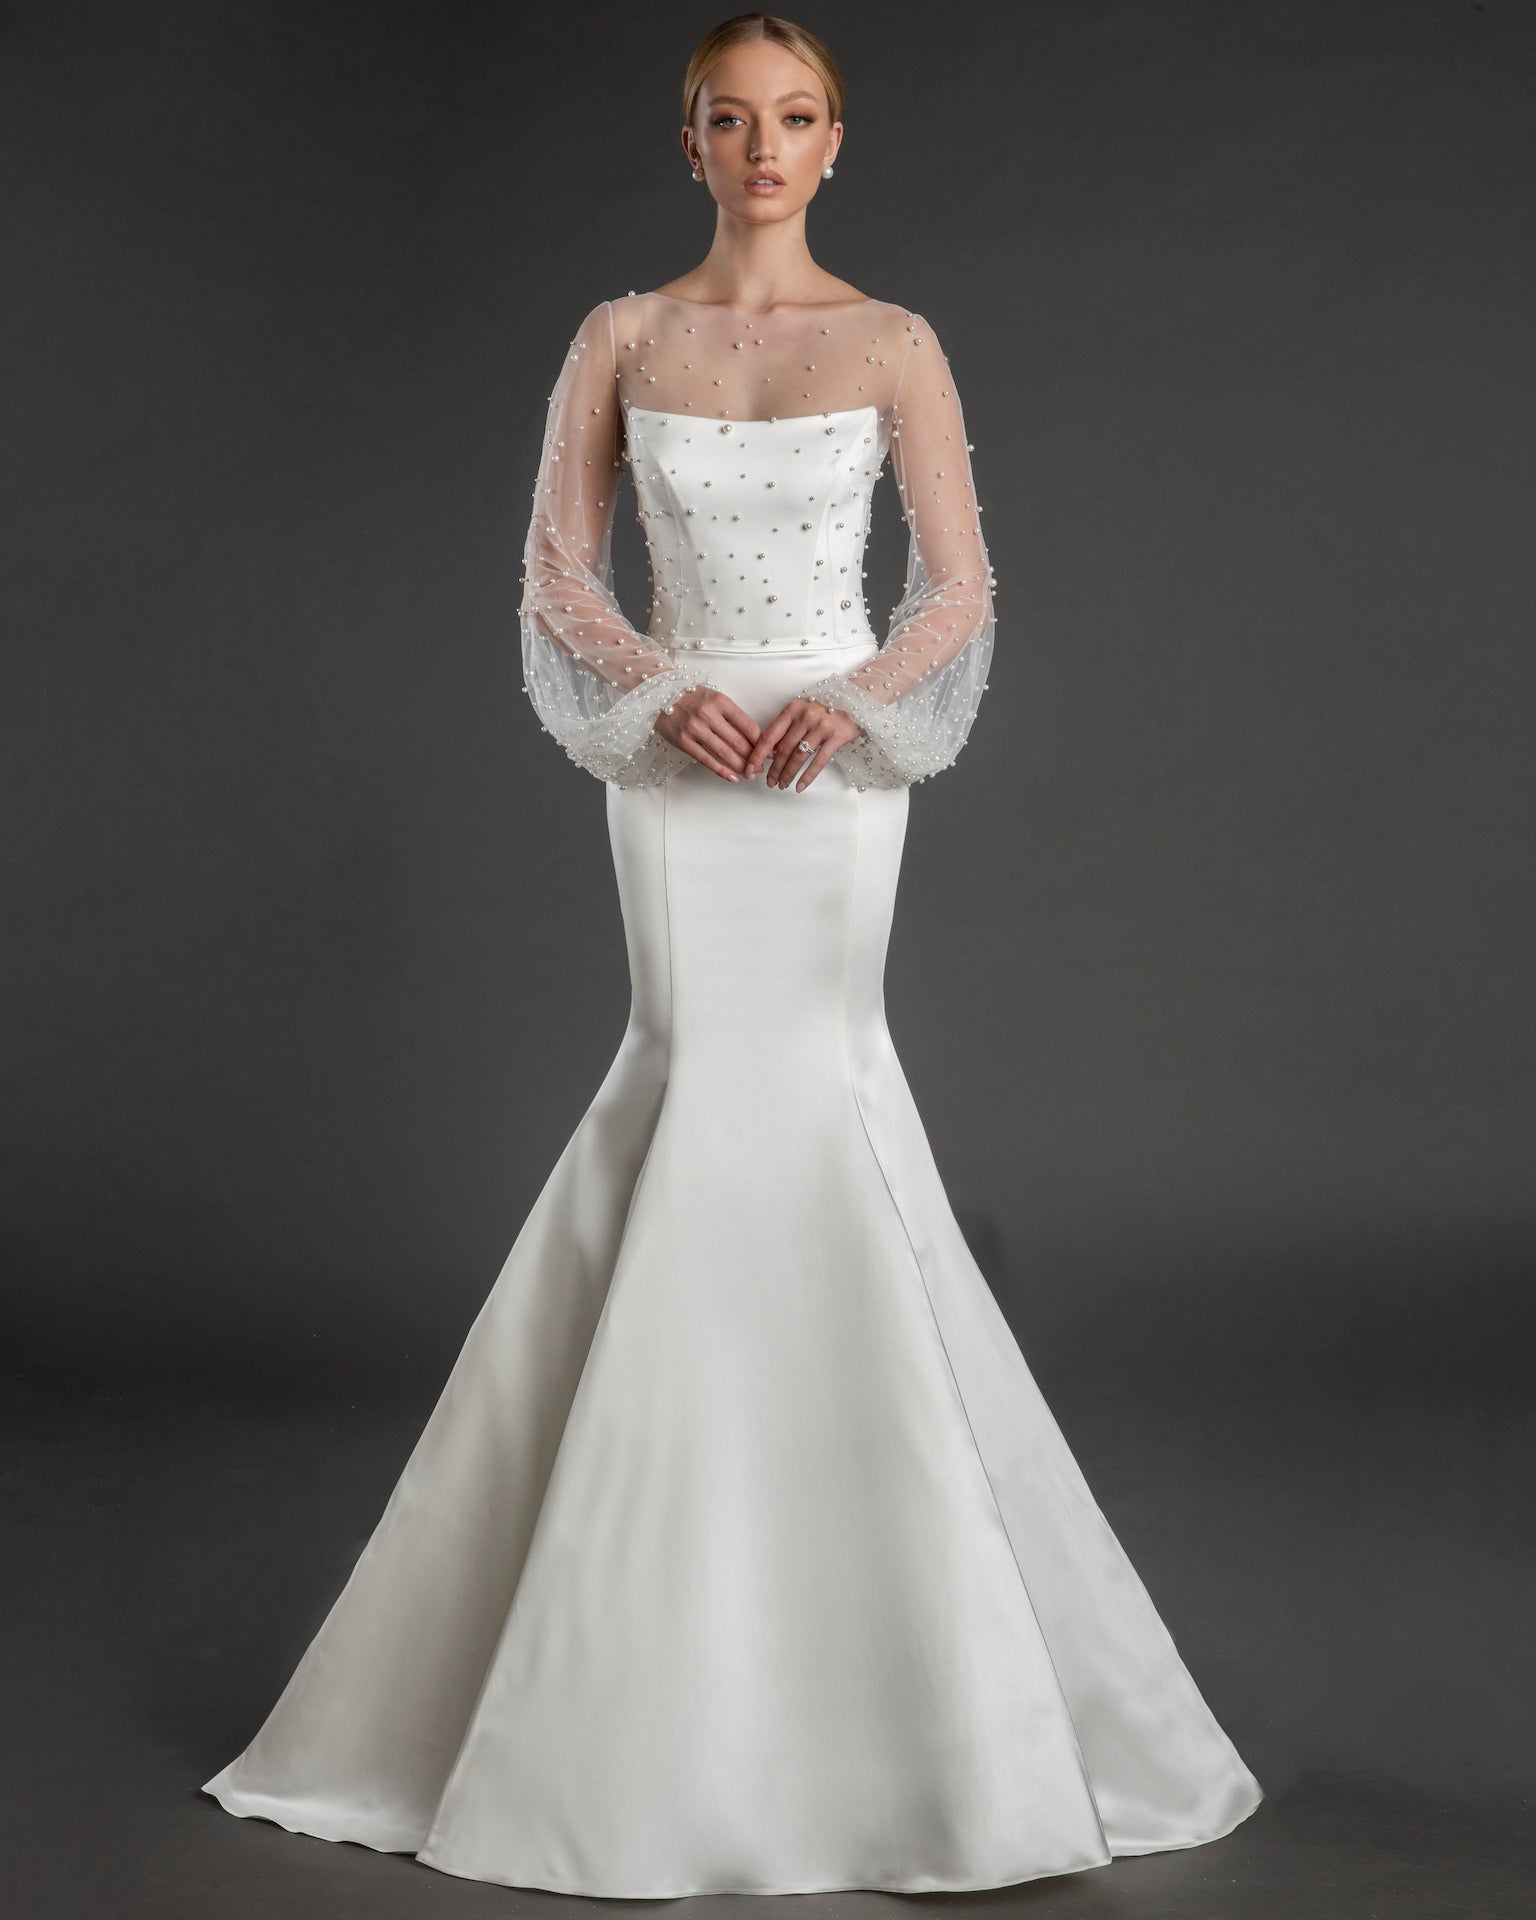 Structured Wedding Dresses & Gowns | Structured Bridal Dresses